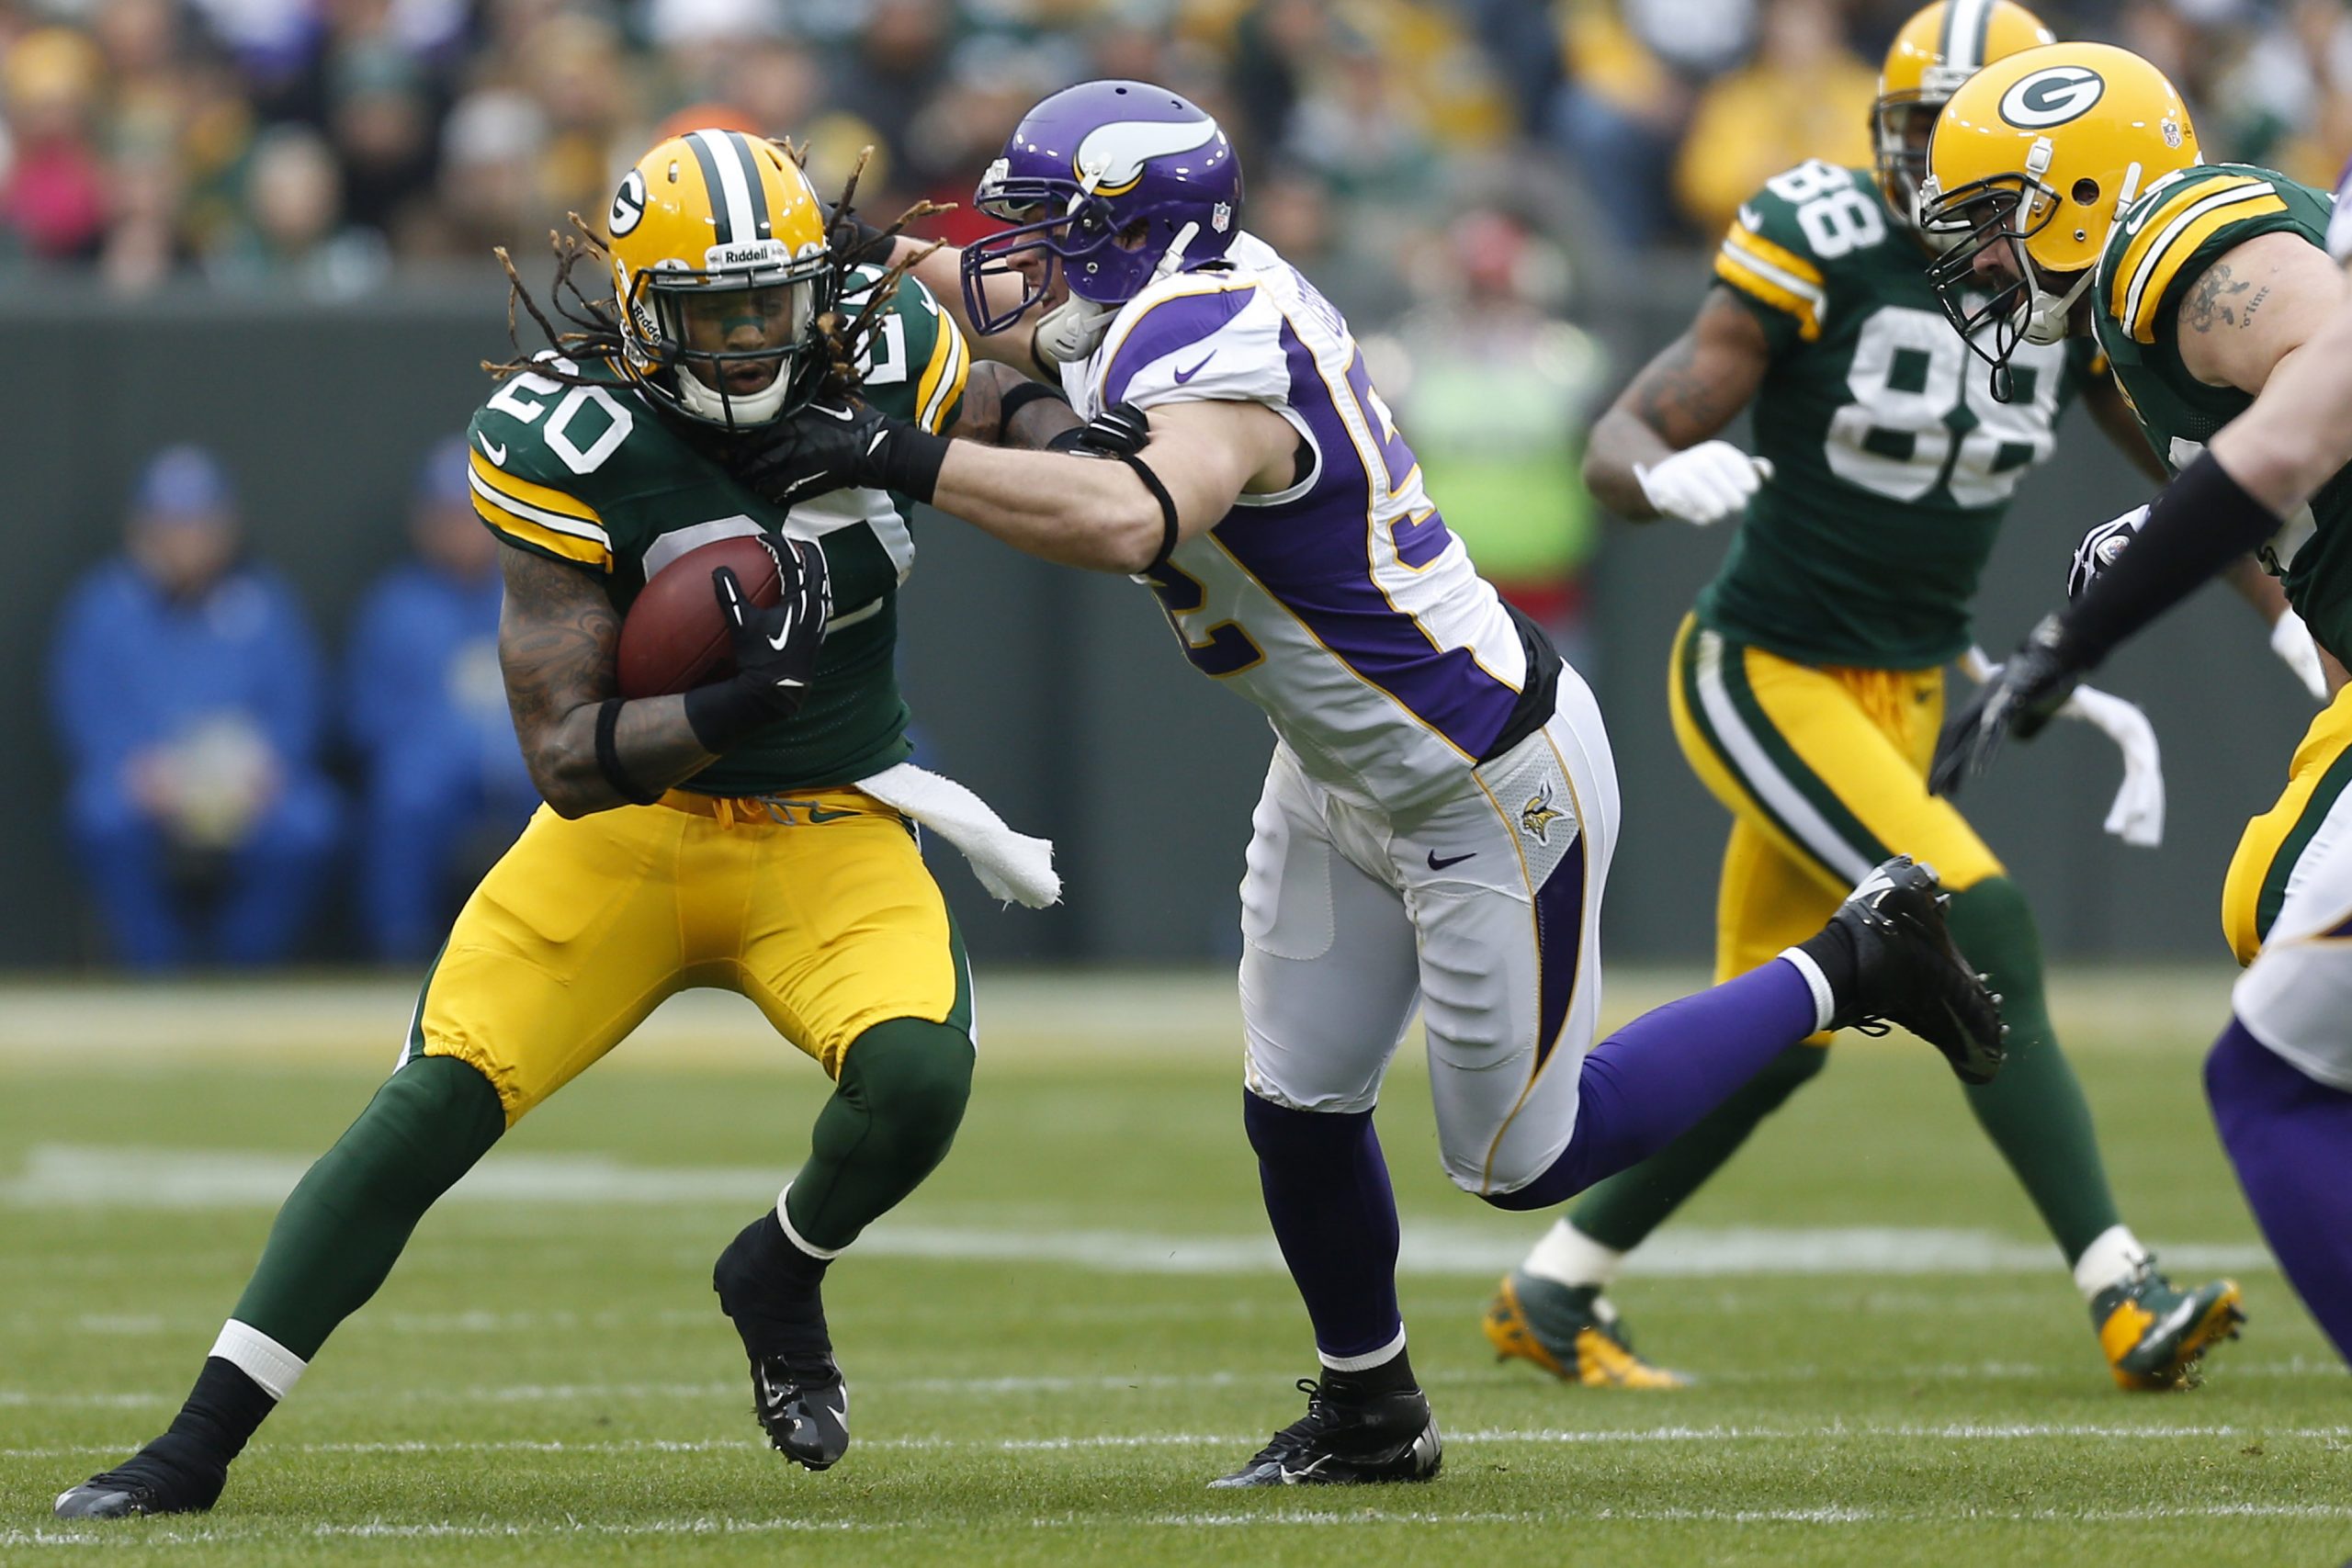 Alex Green of the Green Bay Packers runs the ball against the Minnesota Vikings.